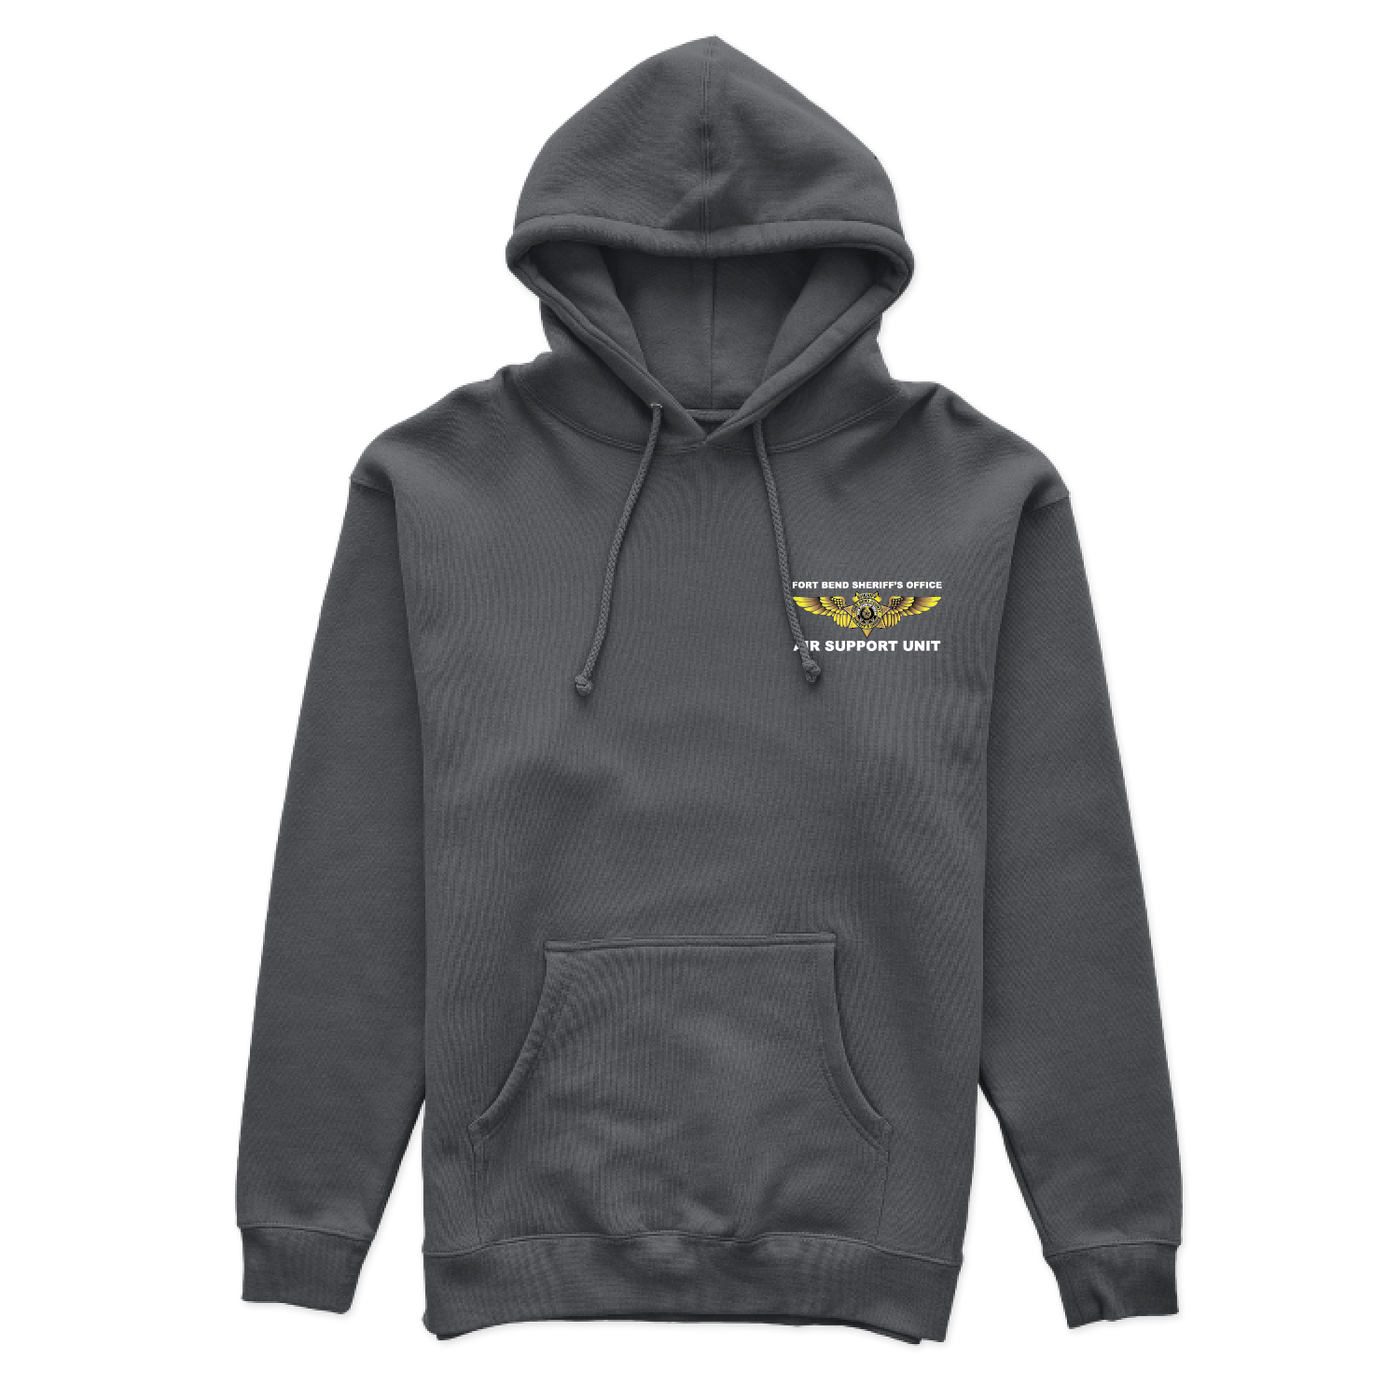 FBCSO Air Support Unit Gold Hoodies